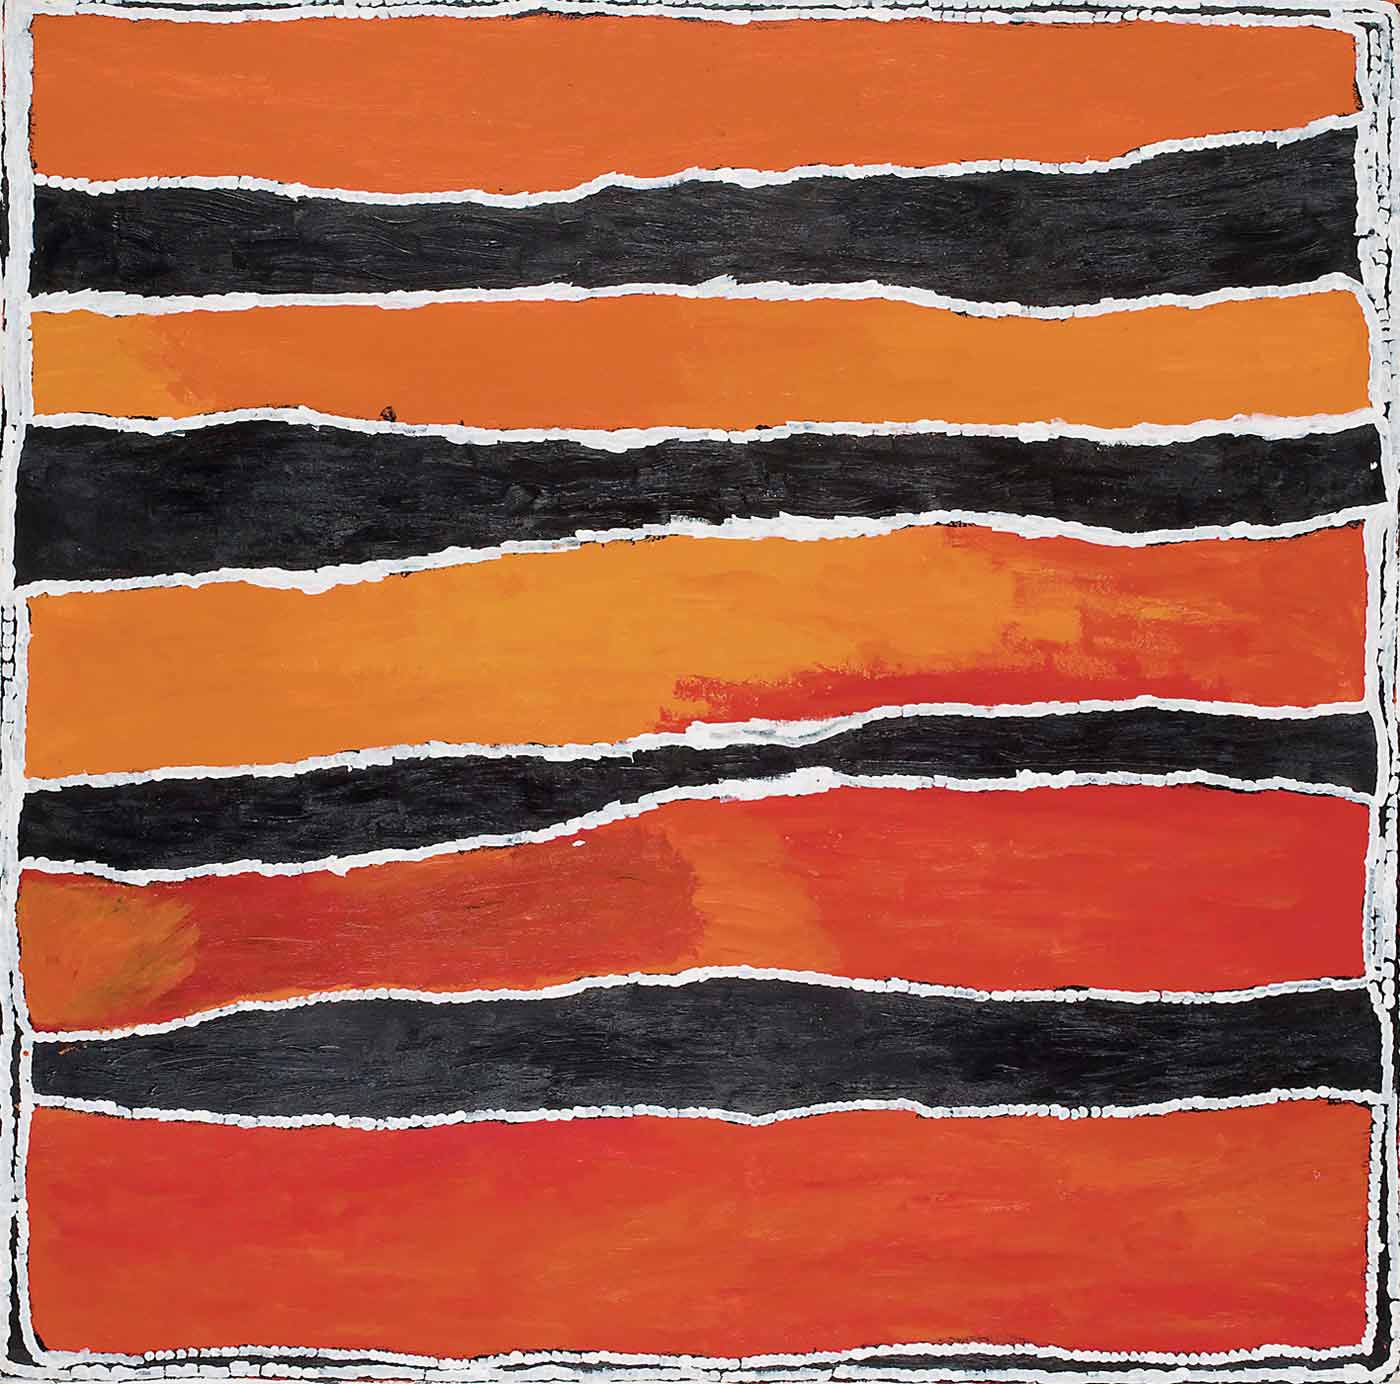 A square painting on canvas with horizontal uneven stripes in orange and black with thin white dividing lines. The orange stripes start as a medium tone at the top, and then yellow-orange in the central section and red-orange in the bottom part of the painting.  - click to view larger image